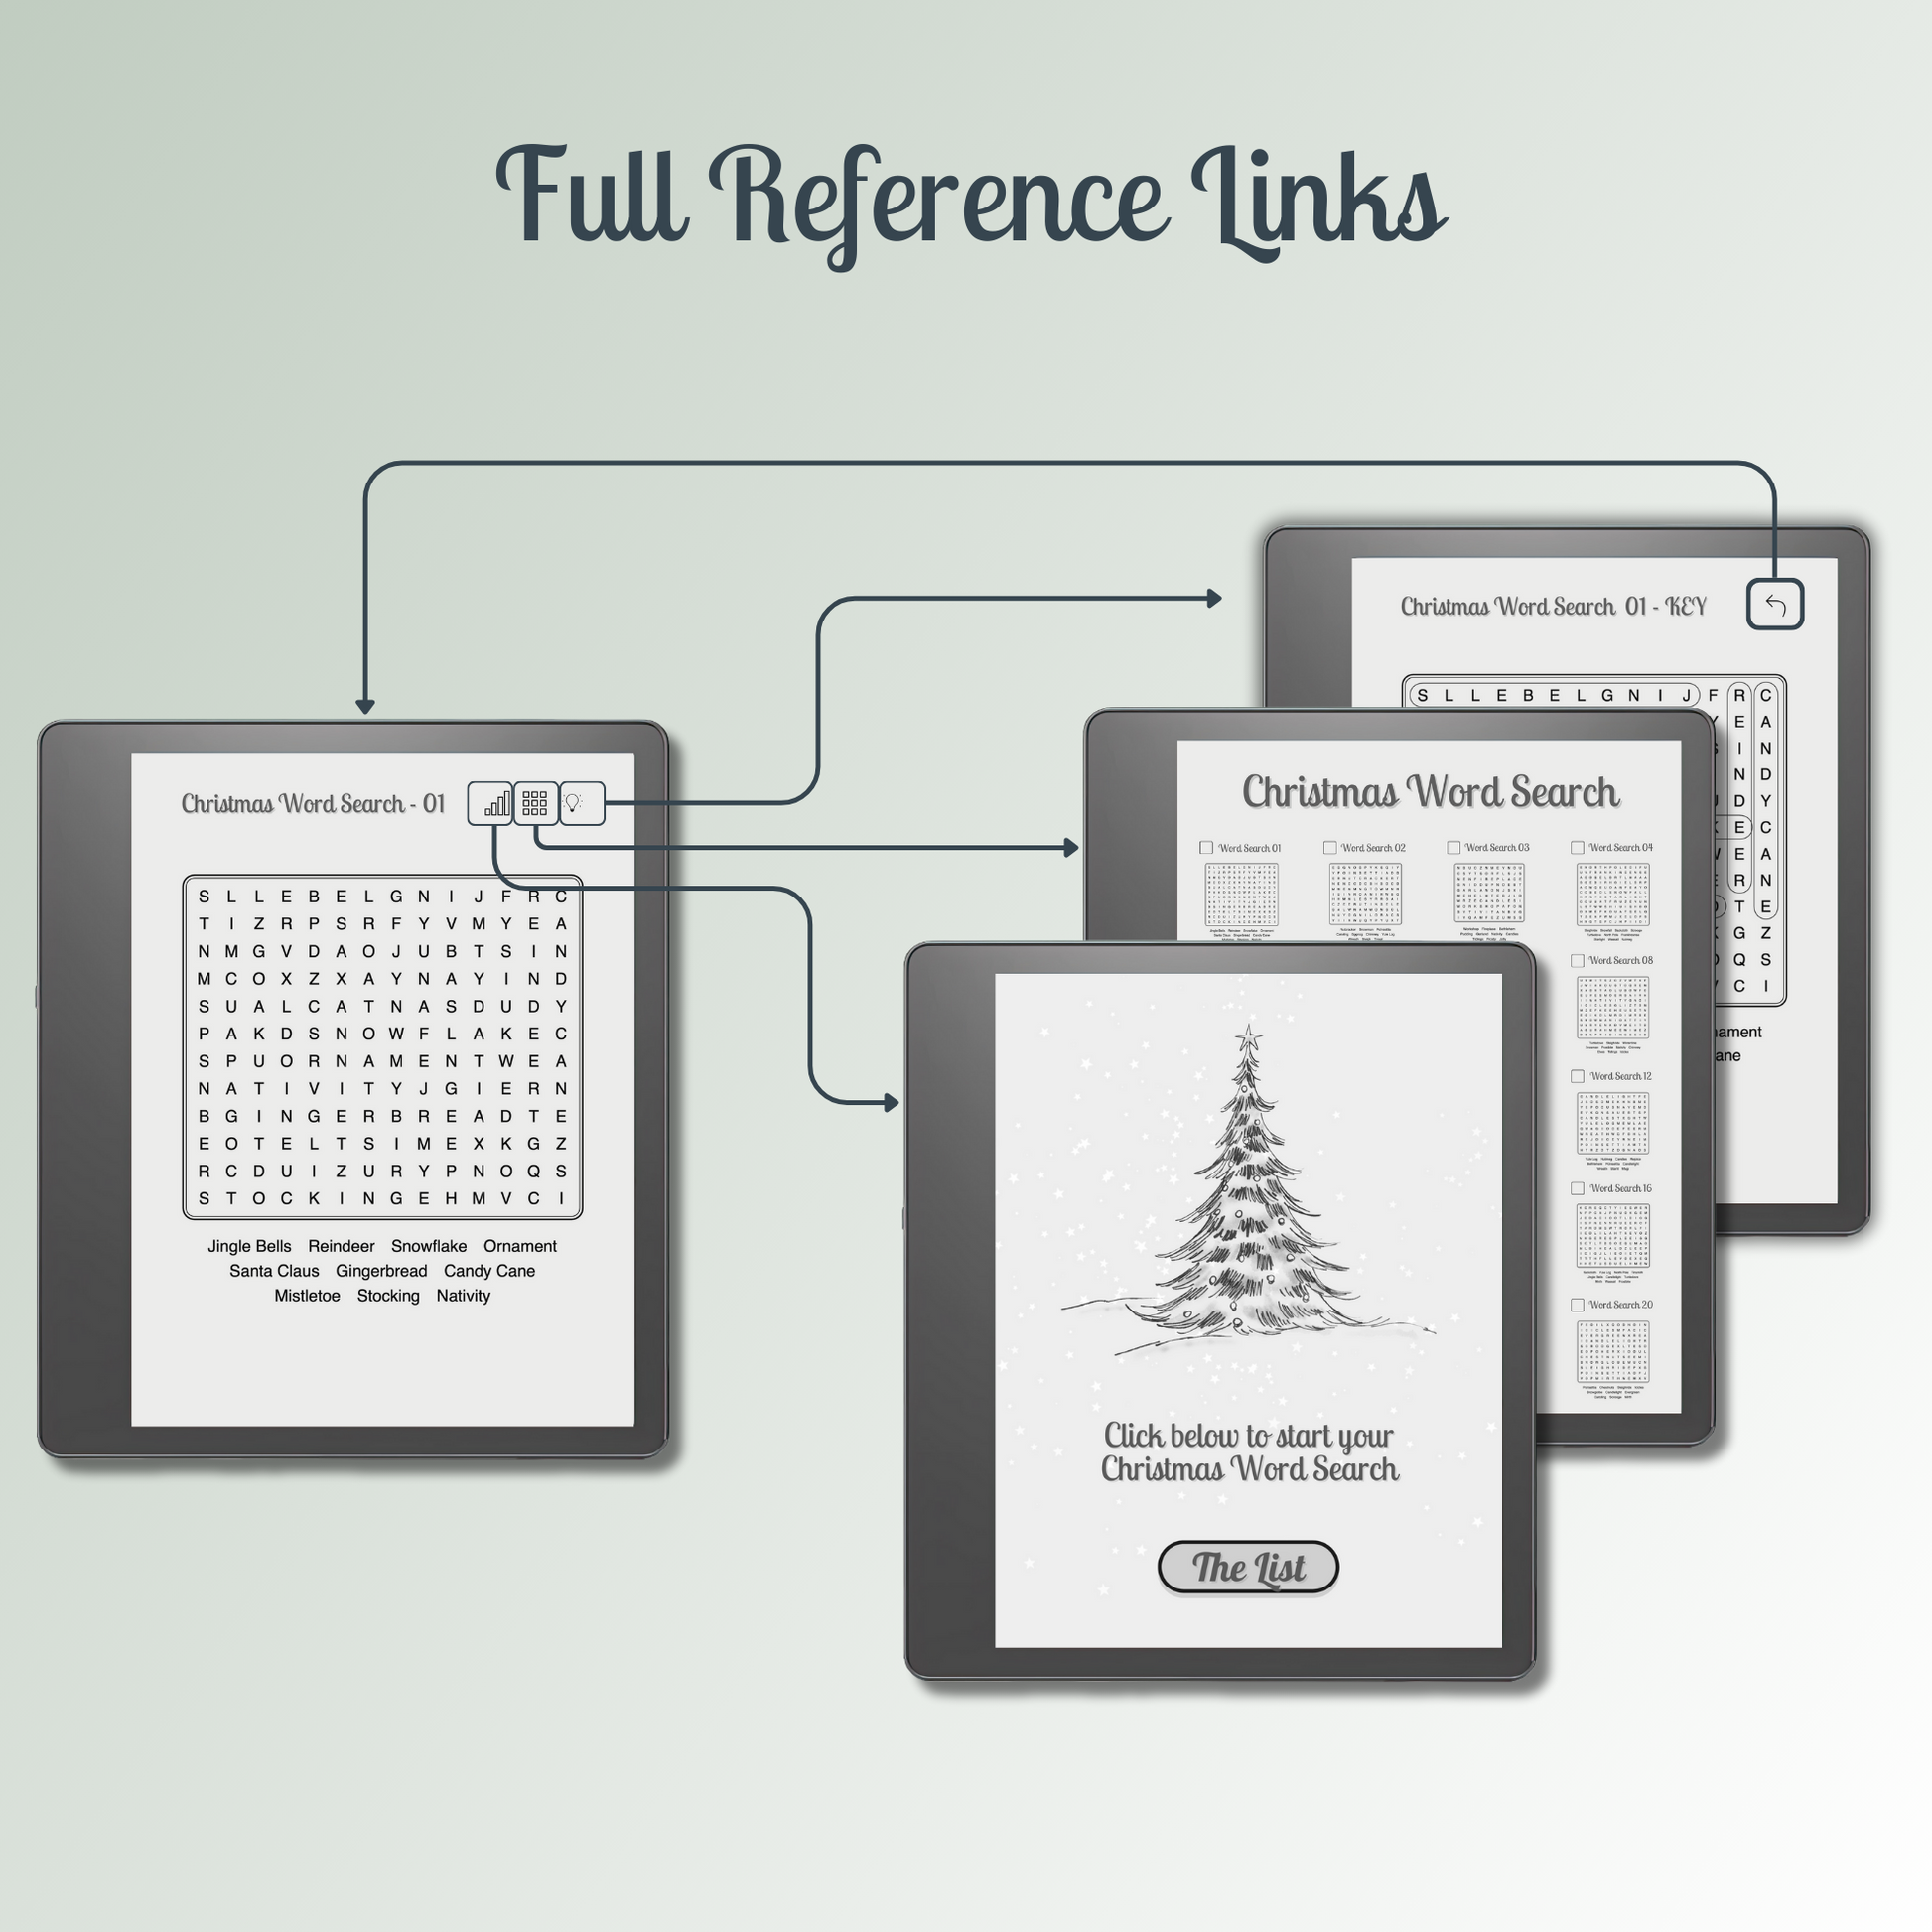 Kindle Scribe Christmas Word Search with full referenced links.